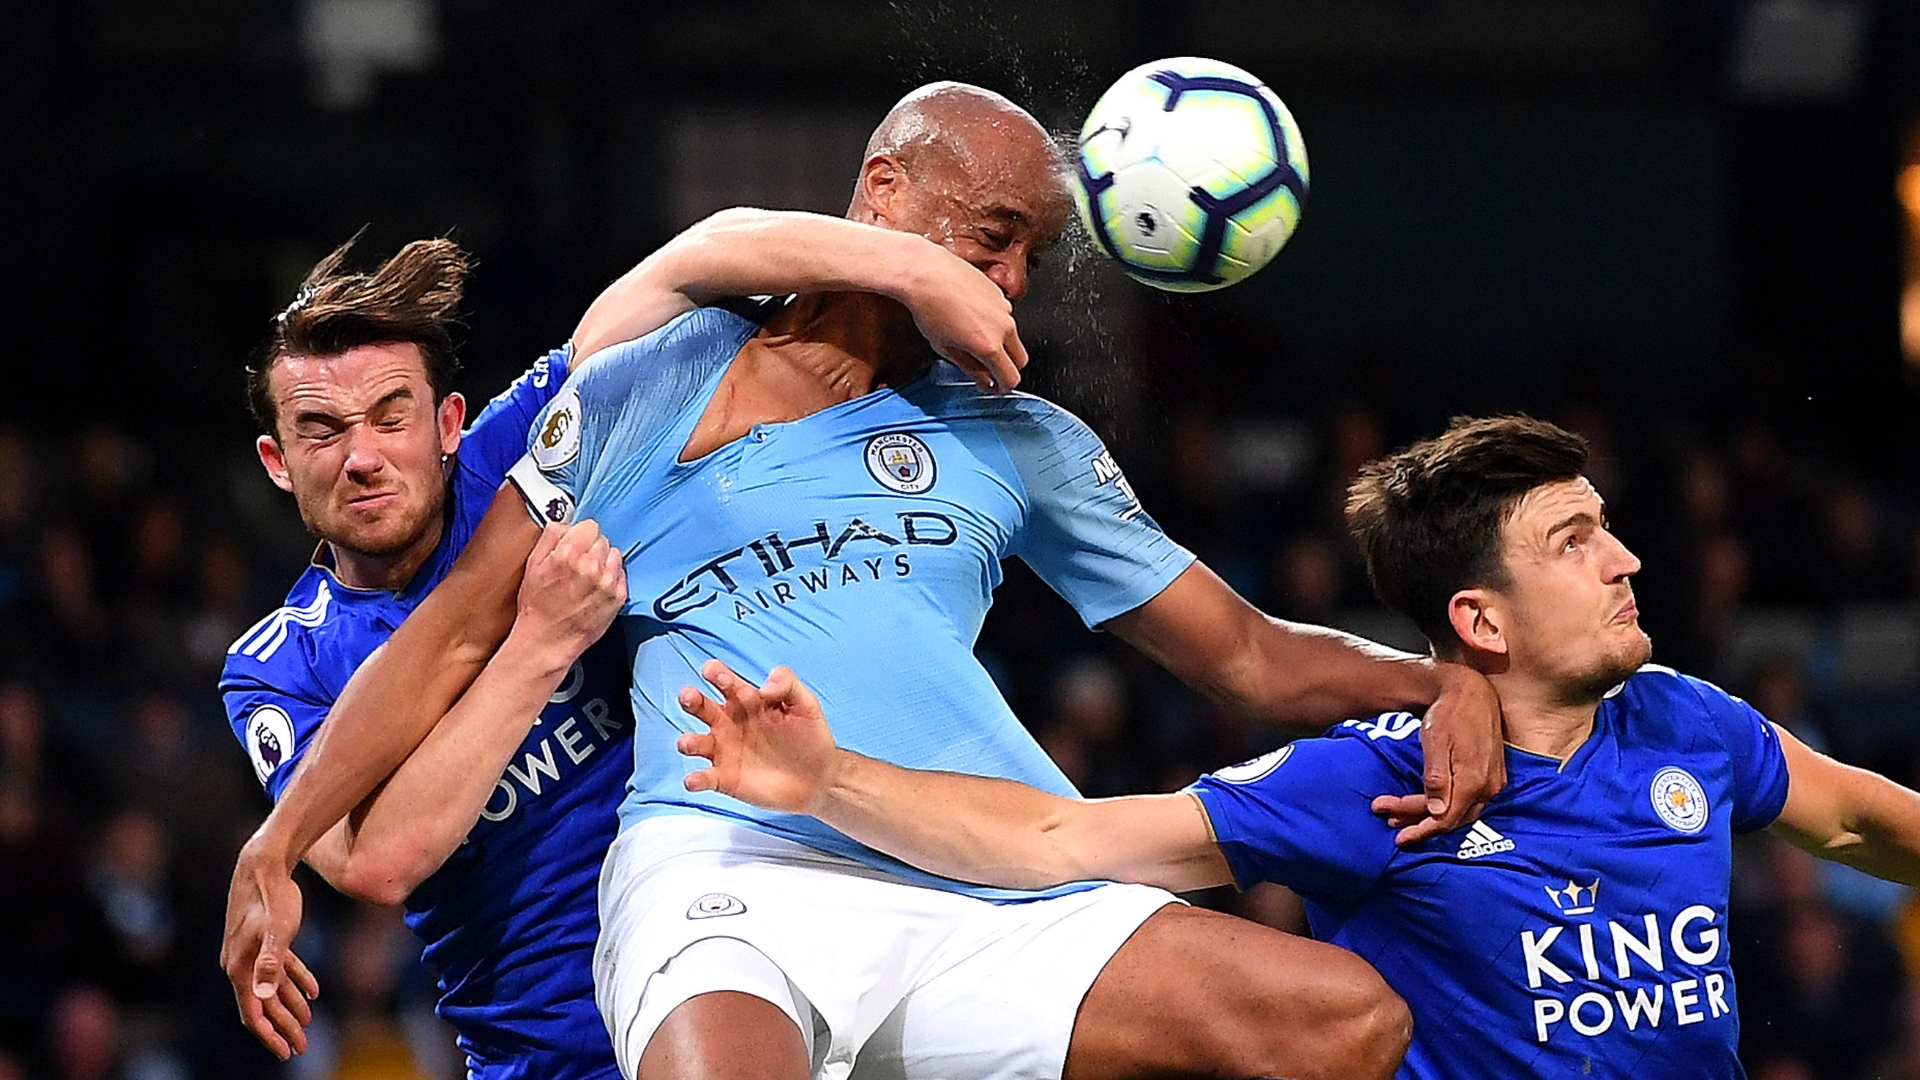 Leicester City – Manchester City / Manchester United 2-1 Leicester player ratings: Paul Pogba ... - Manchester city vs leicester city team.